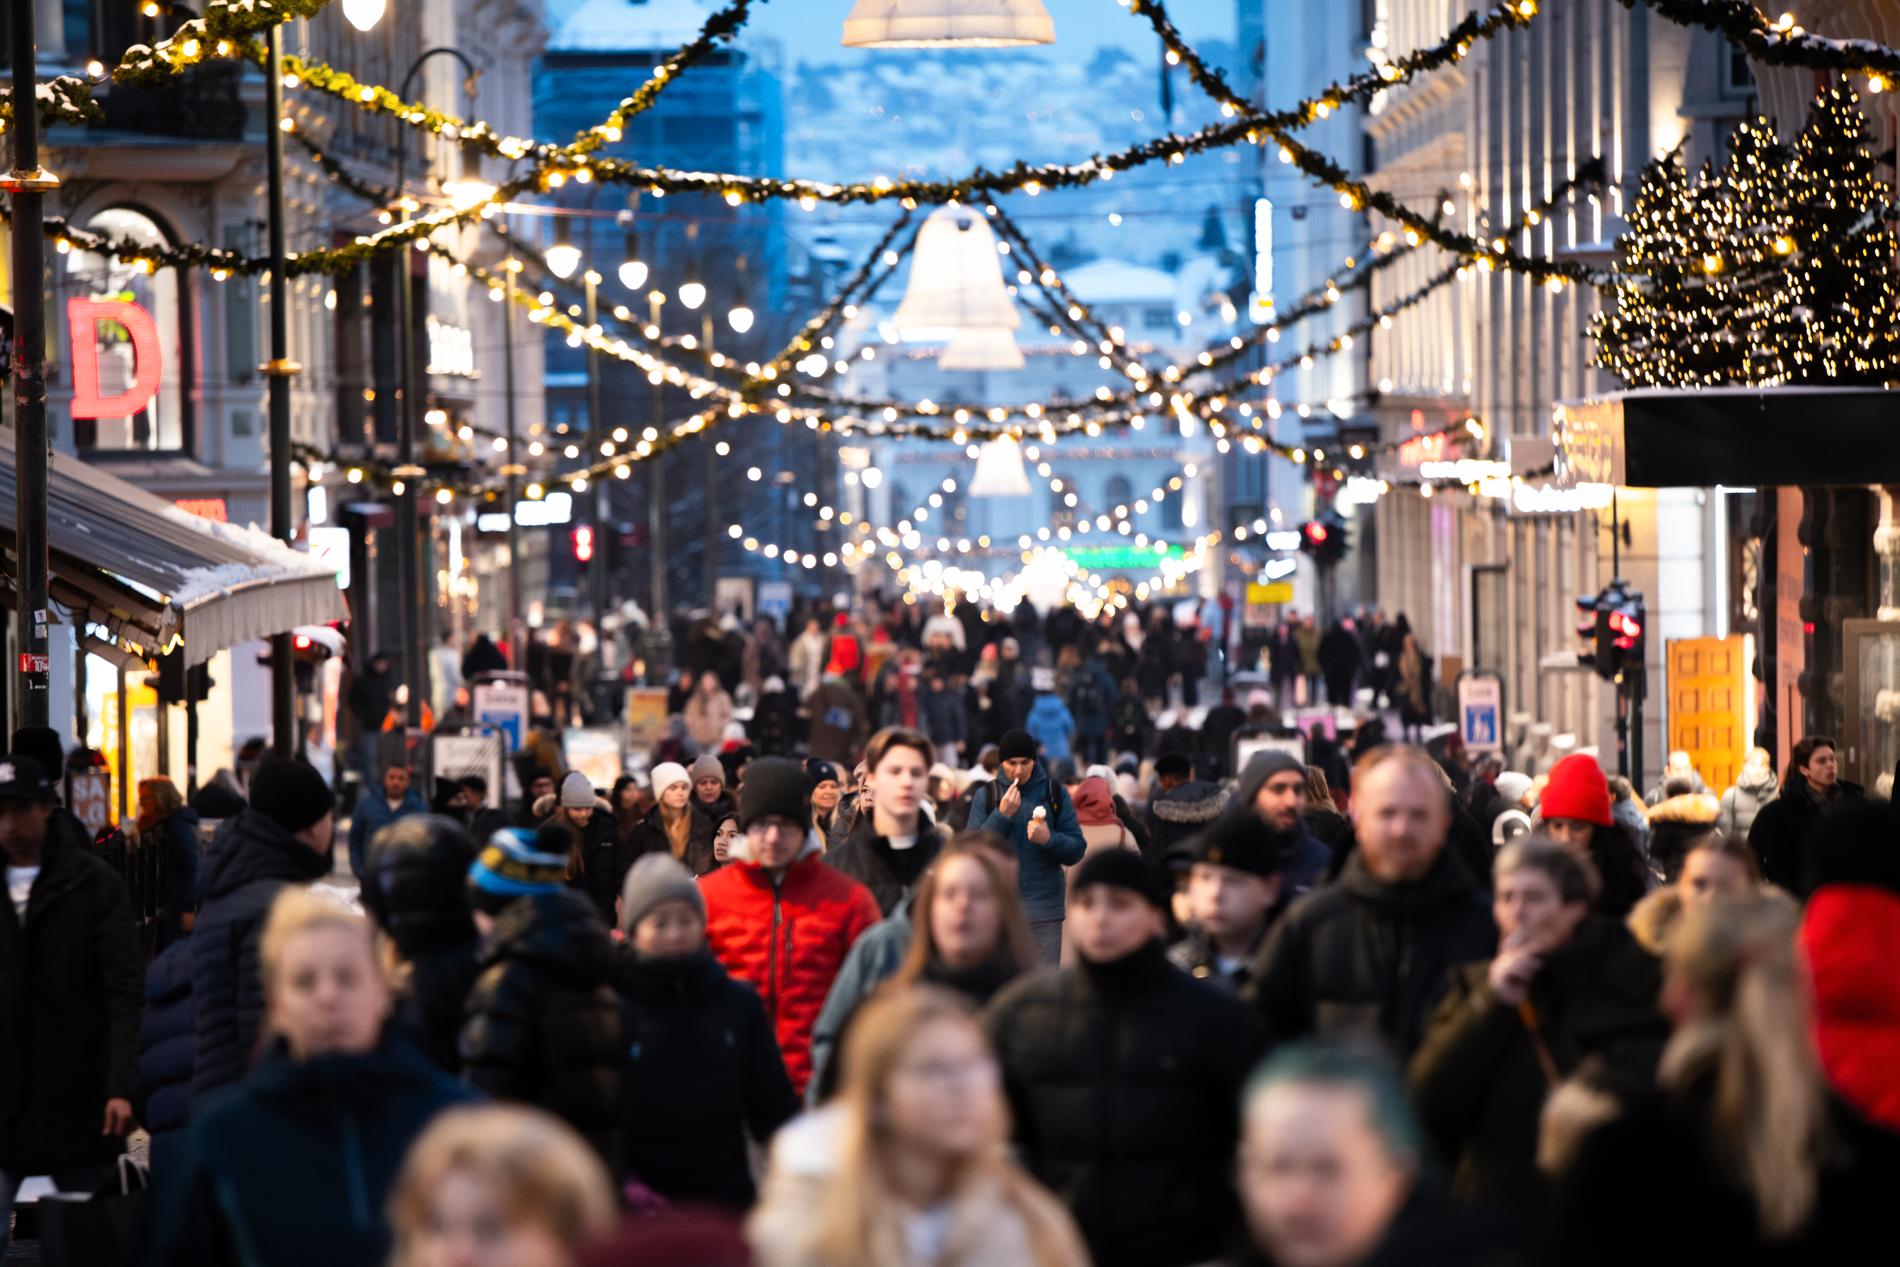 KOK: There are a lot of people in Karl Johan on the first day after Christmas when the shops open. 